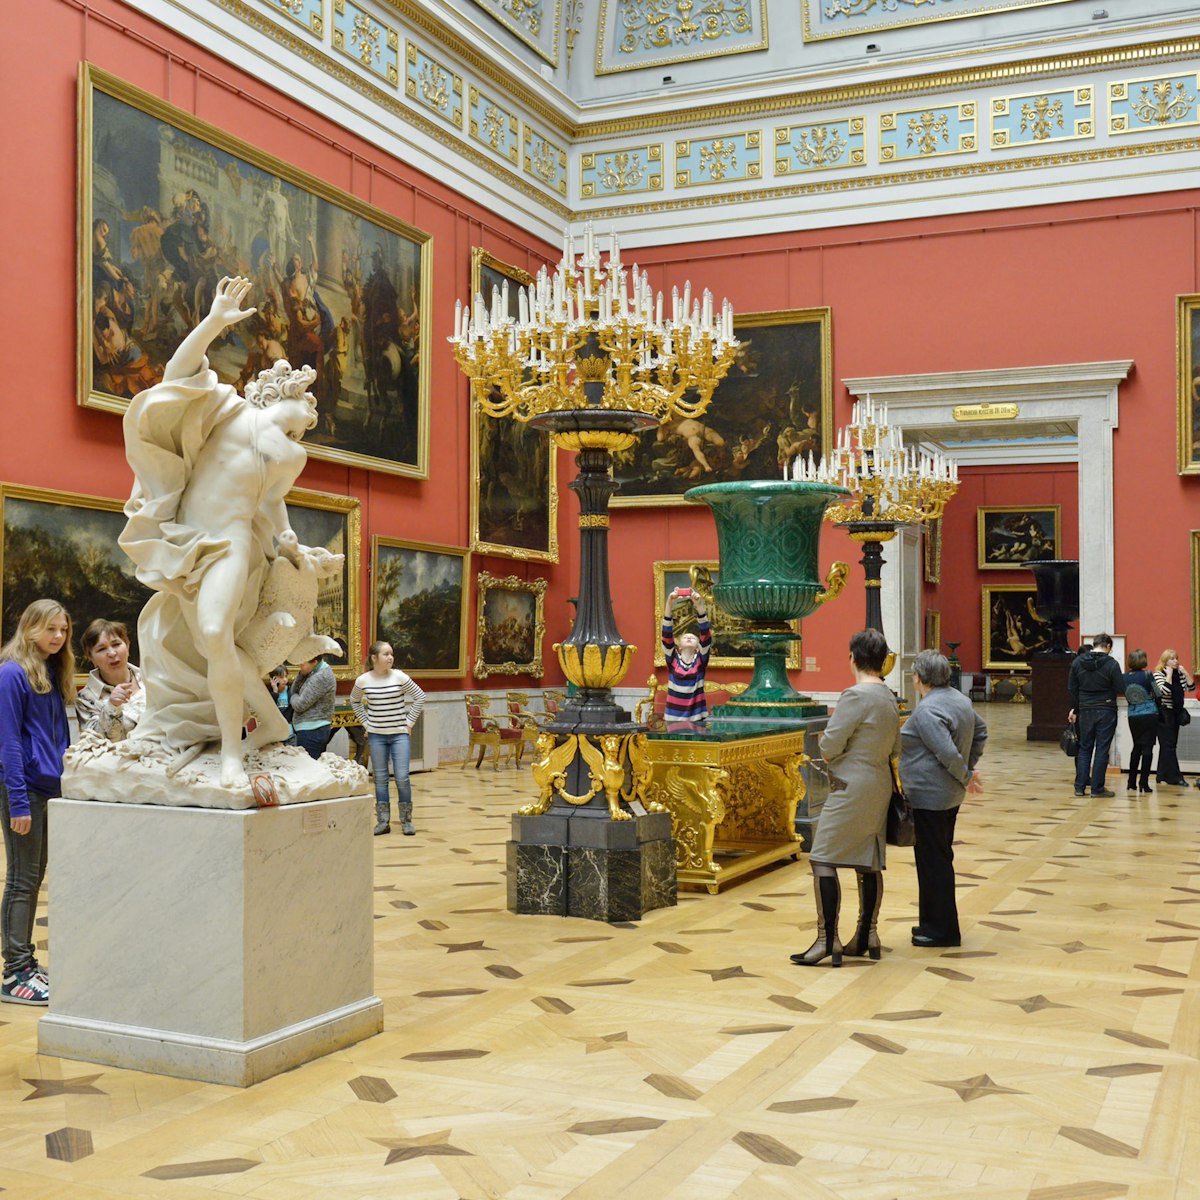 ST PETERSBURG, RUSSIA - JANUARY 25, 2015:State Hermitage is museum of art and culture. One of oldest museums in world, it was founded in 1764 by Catherine Great:
250668808
russia, italian, hermitage, floor, historical, state, sculpture, parquet, viewer, travel, artists, fine, decorated, culture, landmark, gilt, guide, grand, palace, st, saint, old, hall, people, luxurious, chandelier, tour, story, ceremonial, famous, molding, visitor, interior, rich, painting, inside, classic, picture, tourists, tourism, art, ornate, indoor, foreigners, gallery, museum, spb, petersburg